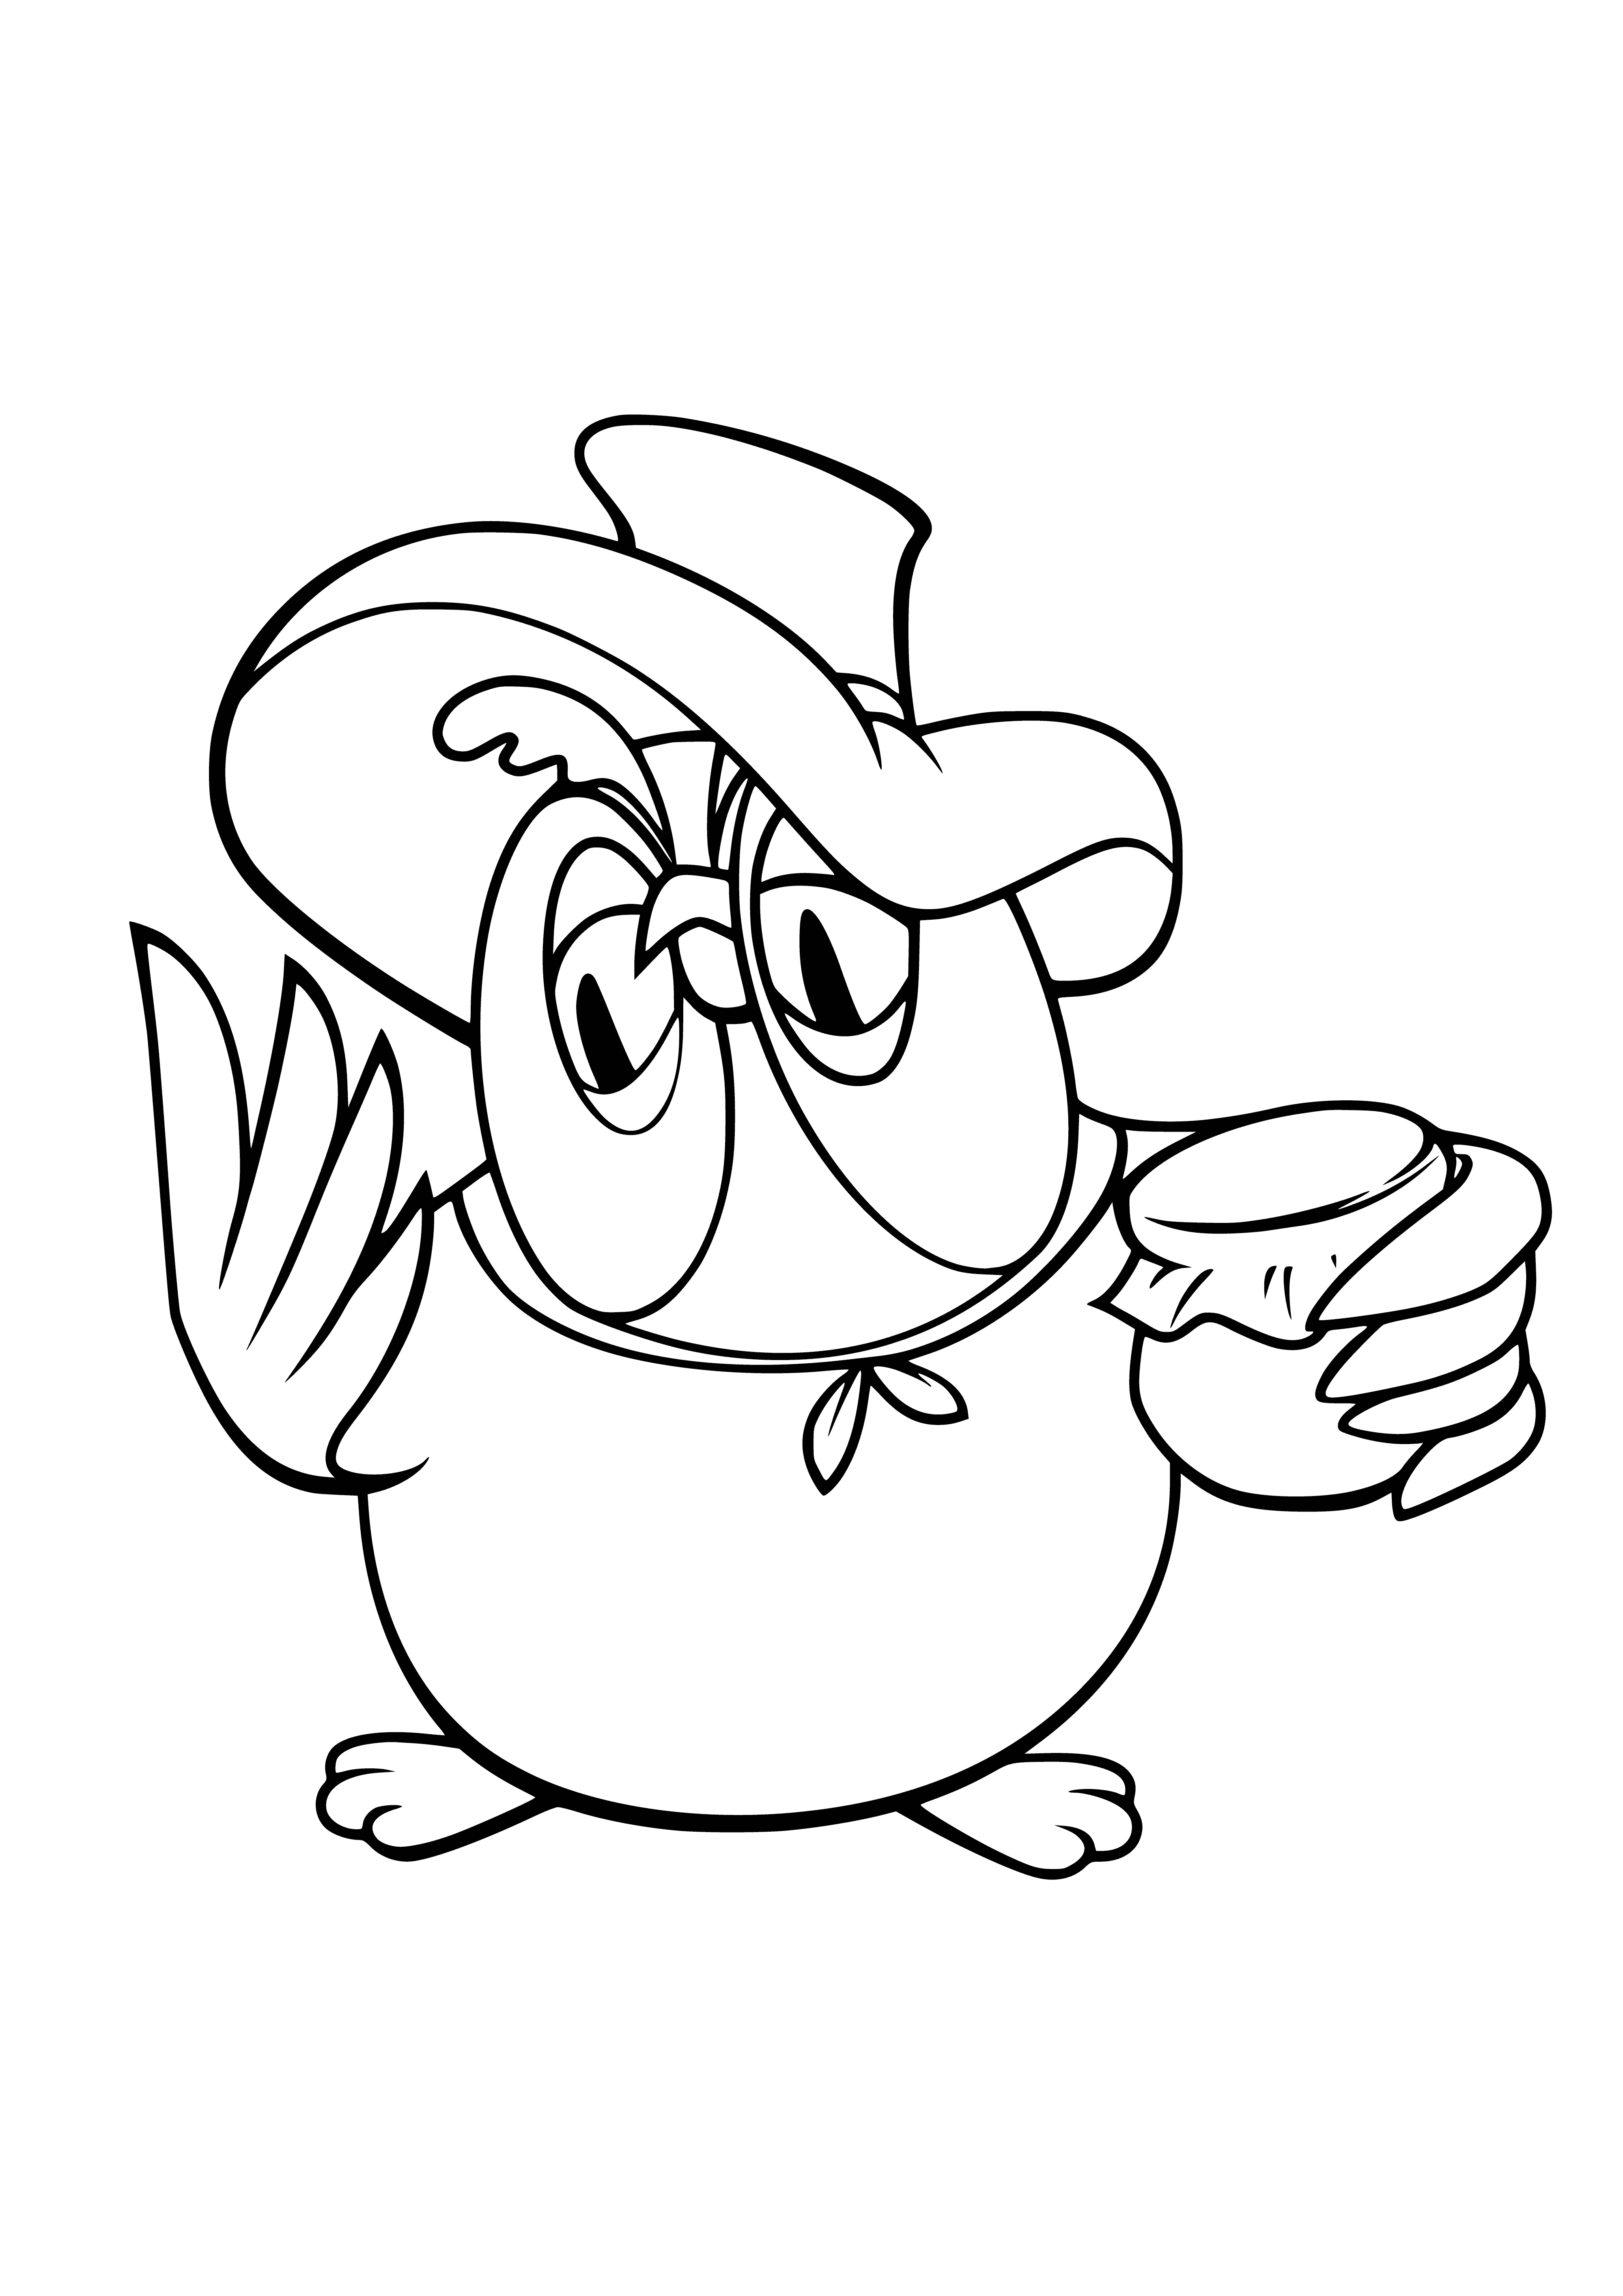 coloring page: A Wise Owl from Winnie the Pooh is holding a book and wearing a blue scarf. #WinniethePooh #ColoringPage